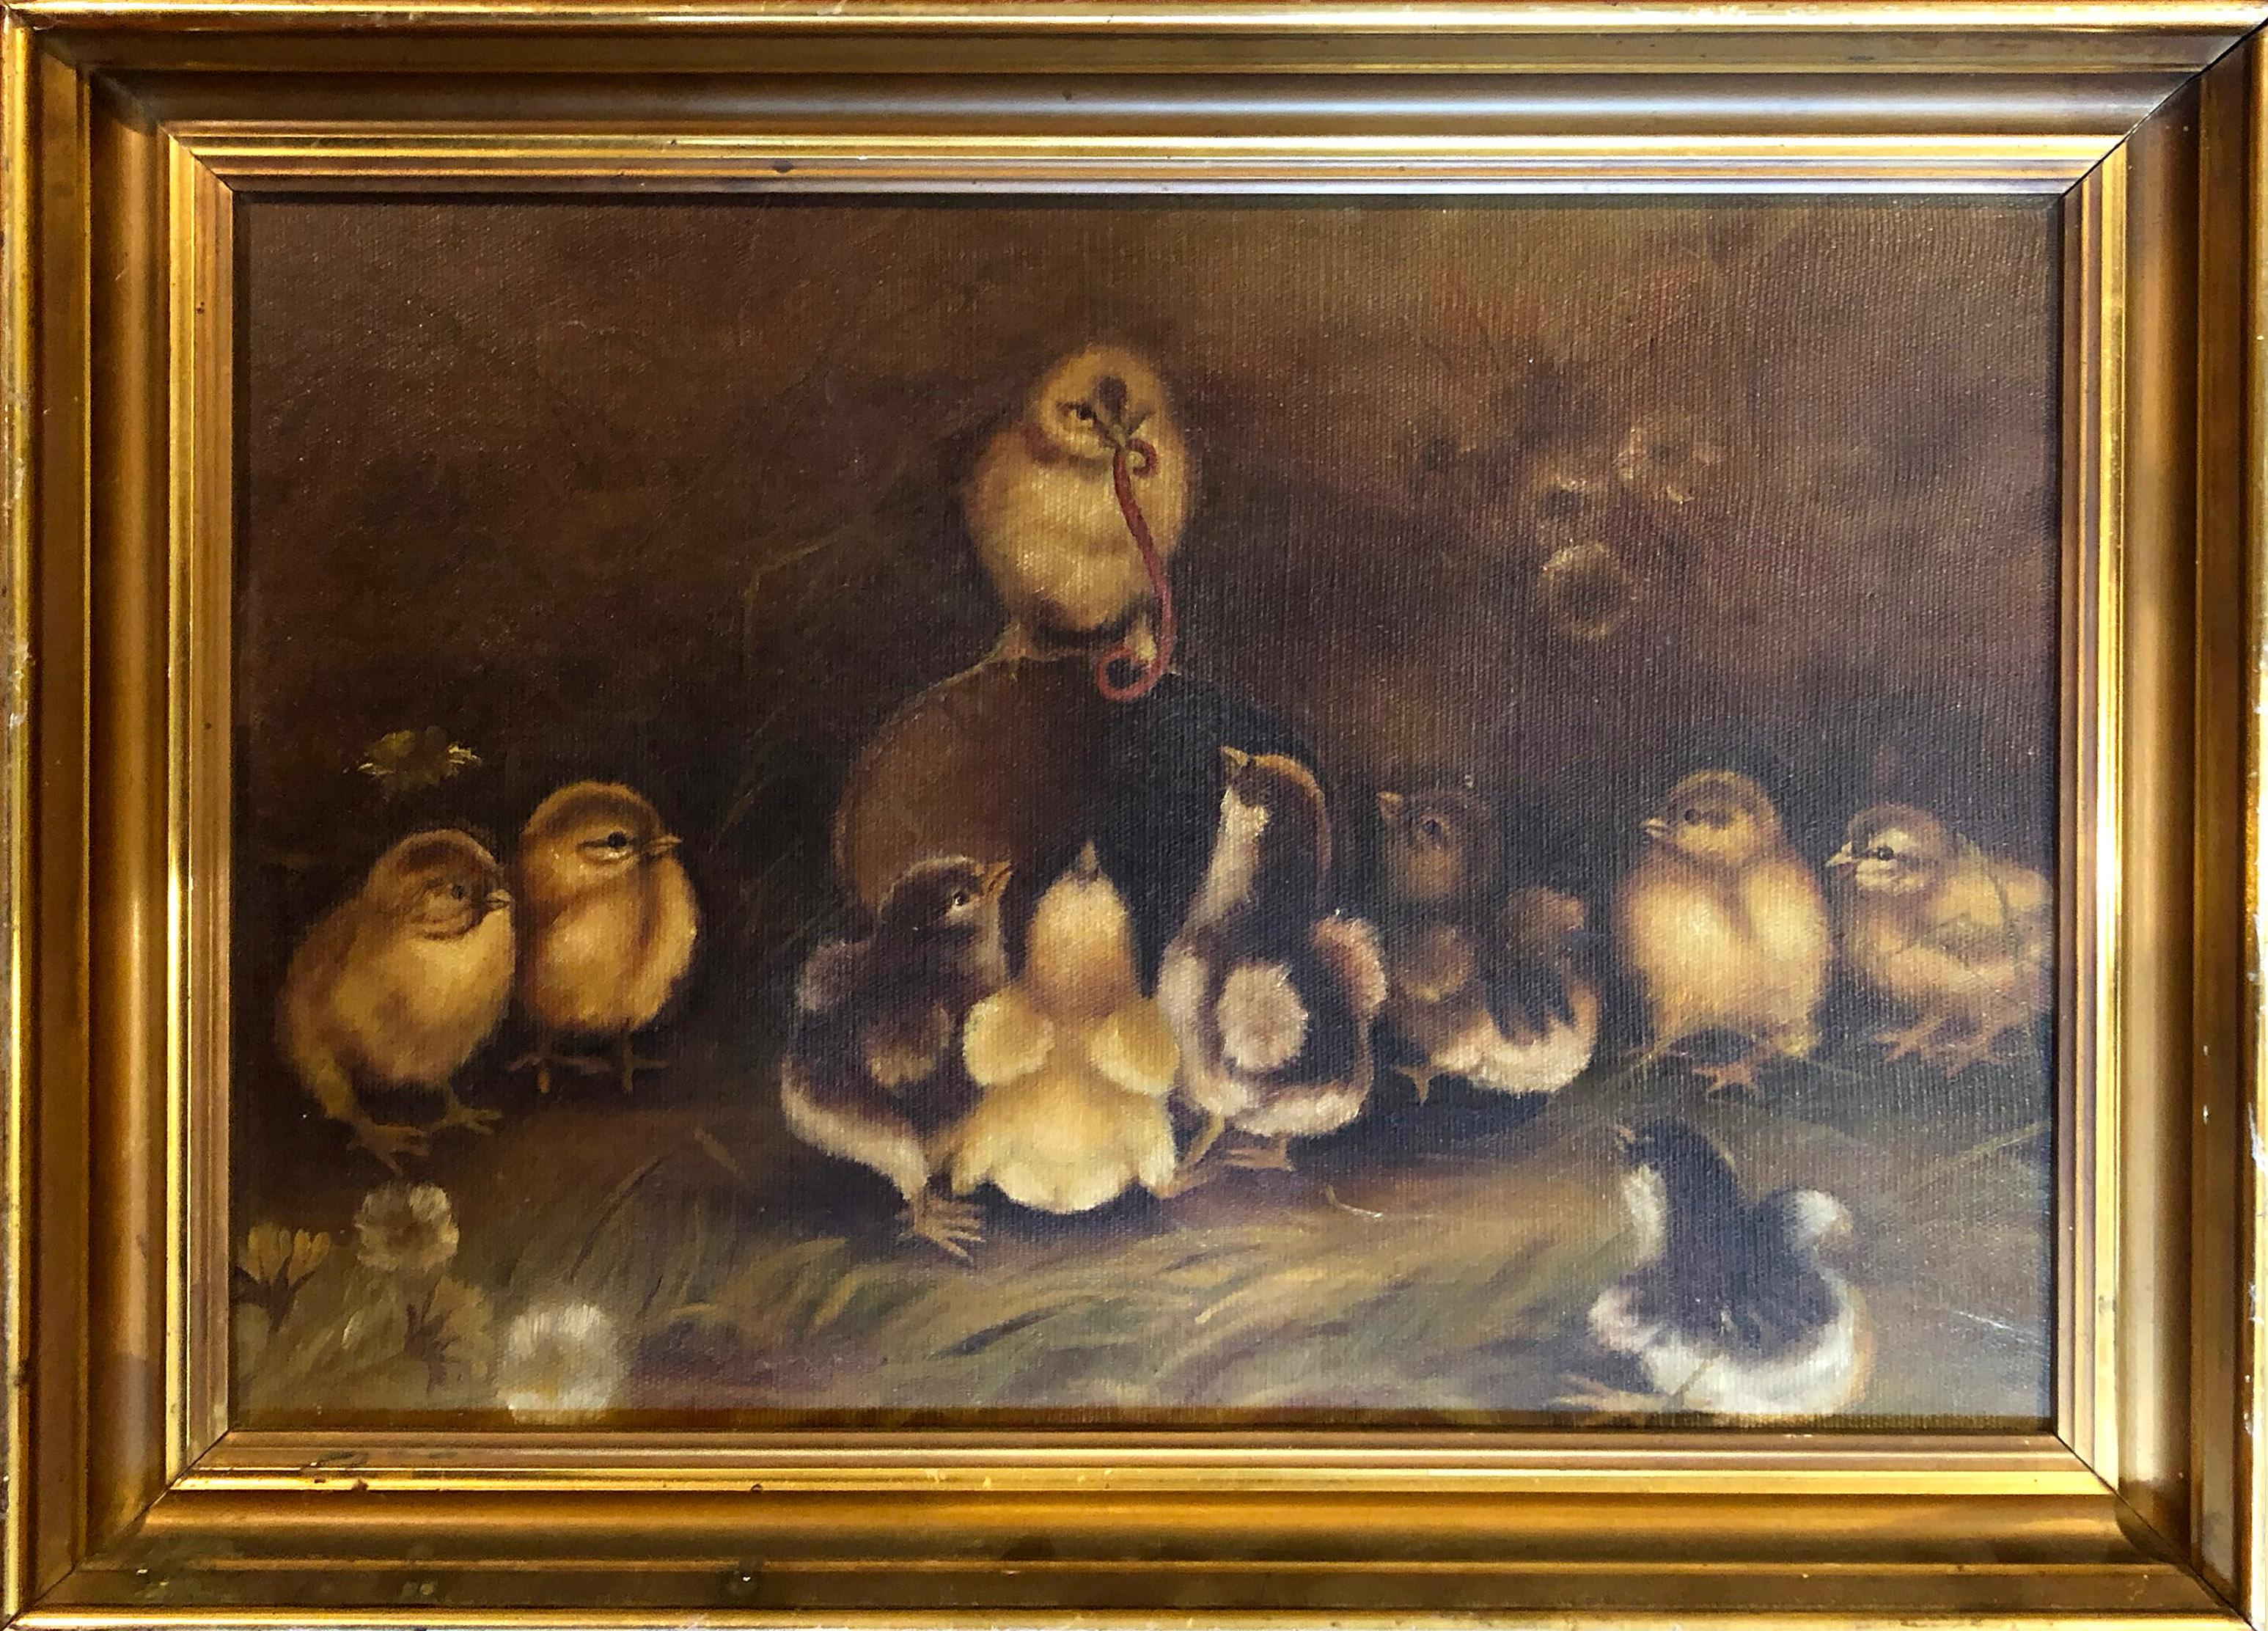 Antique American Oil Painting Chicks in a Barn Worm Charming Original Frame Rare - Brown Animal Painting by Unknown